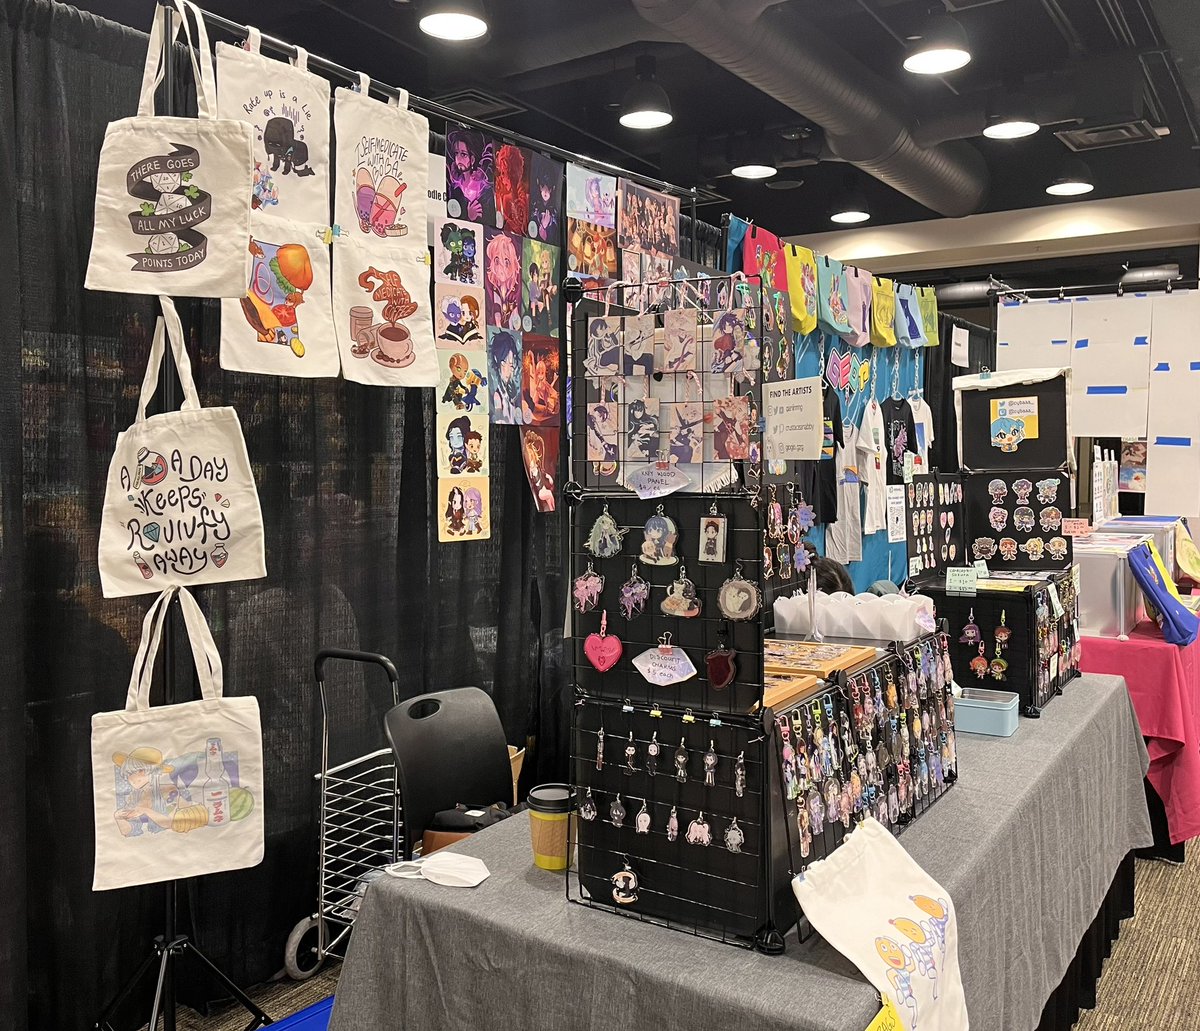 I realized I never posted what our table set up looks like for Sakura Con! It was a struggle but I feel like the end result is quite nice. Tomorrow is the last dayyy!